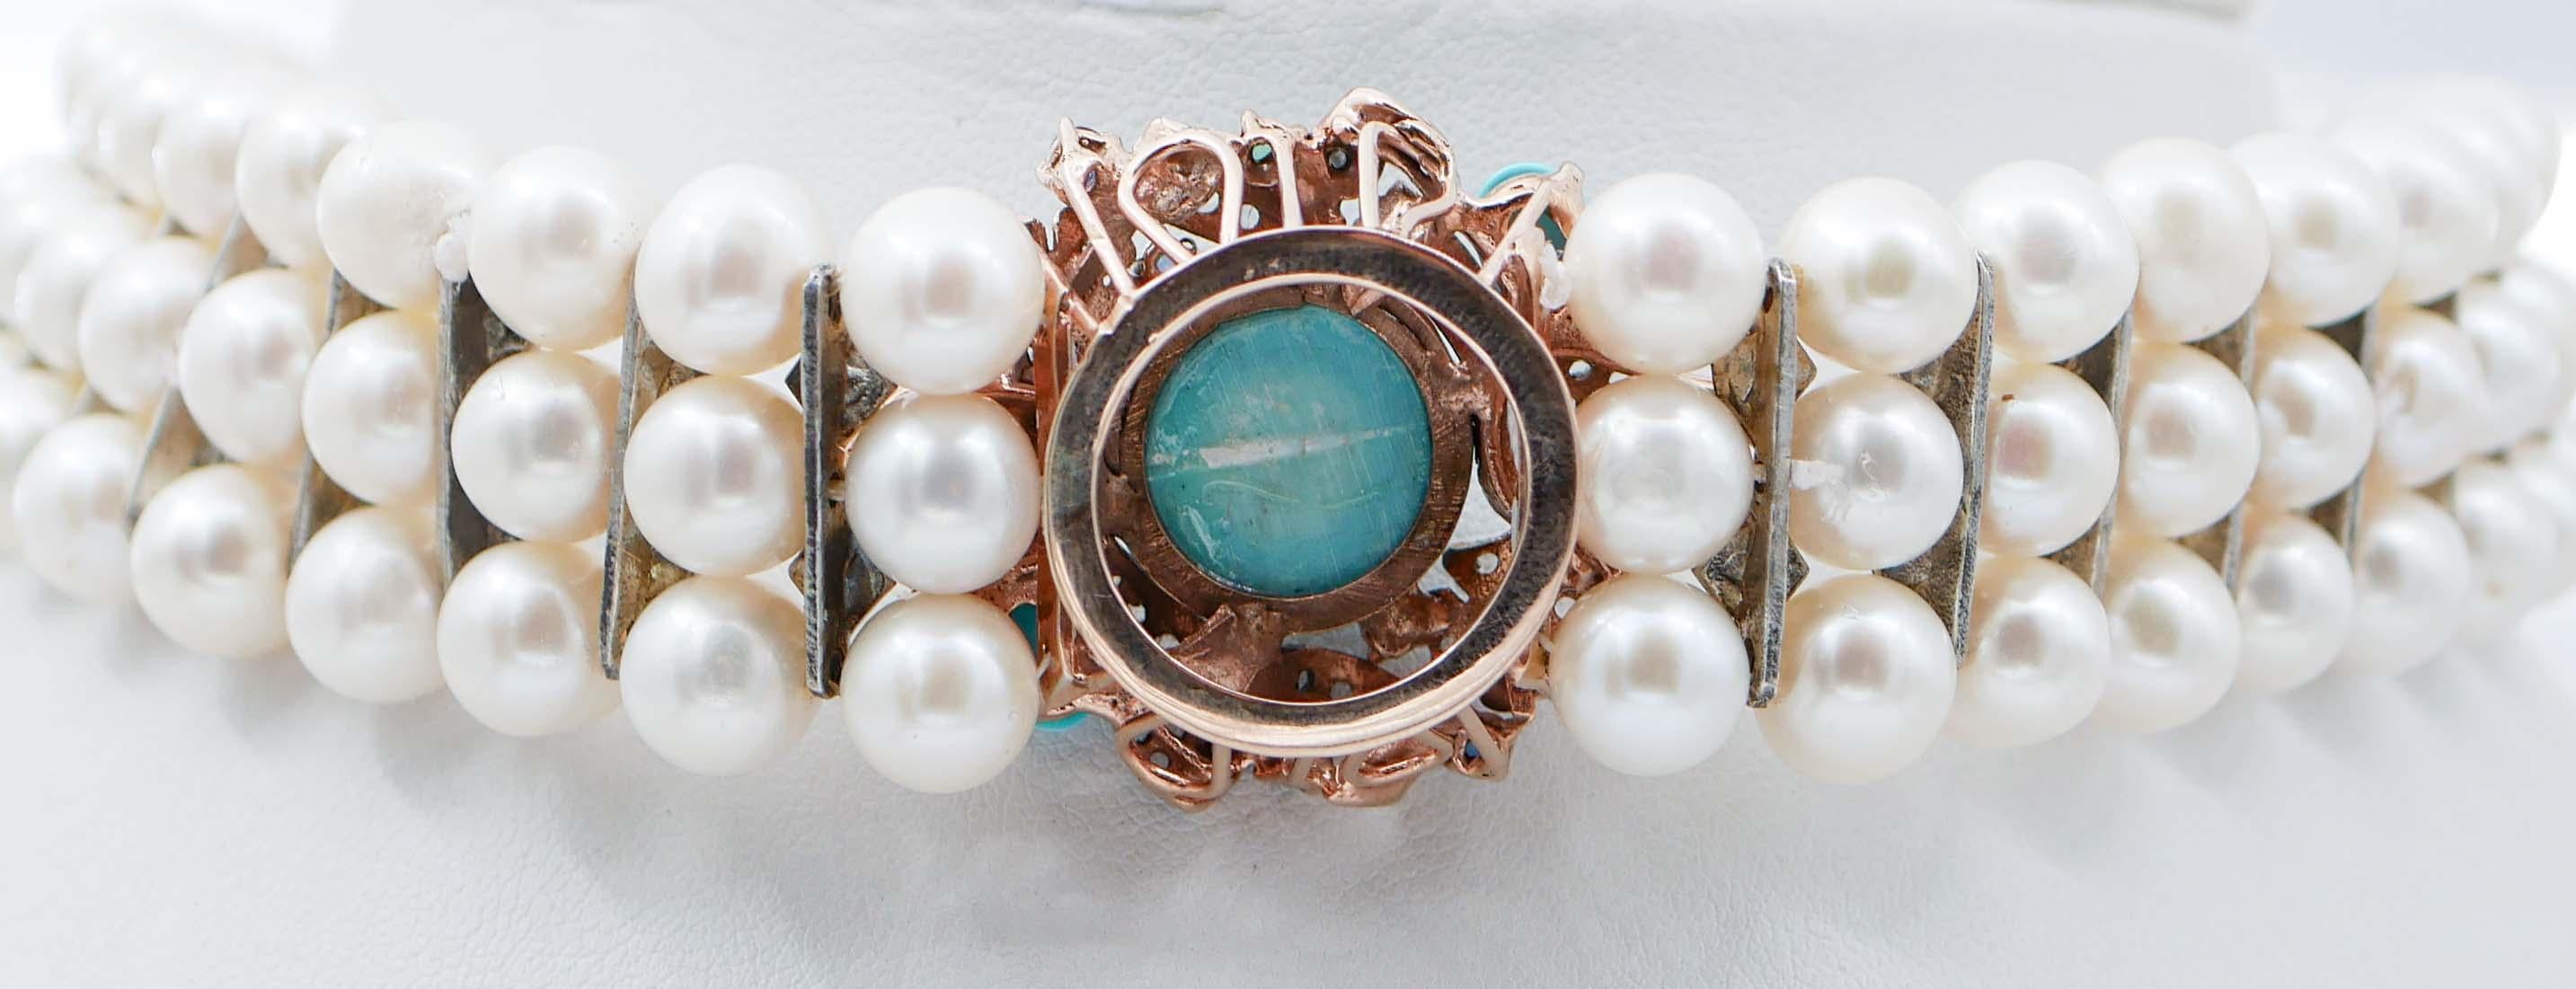 Mixed Cut Pearls, Magnesite, Turquoise, Emeralds, Sapphires, Diamonds, Gold and Silver Nec